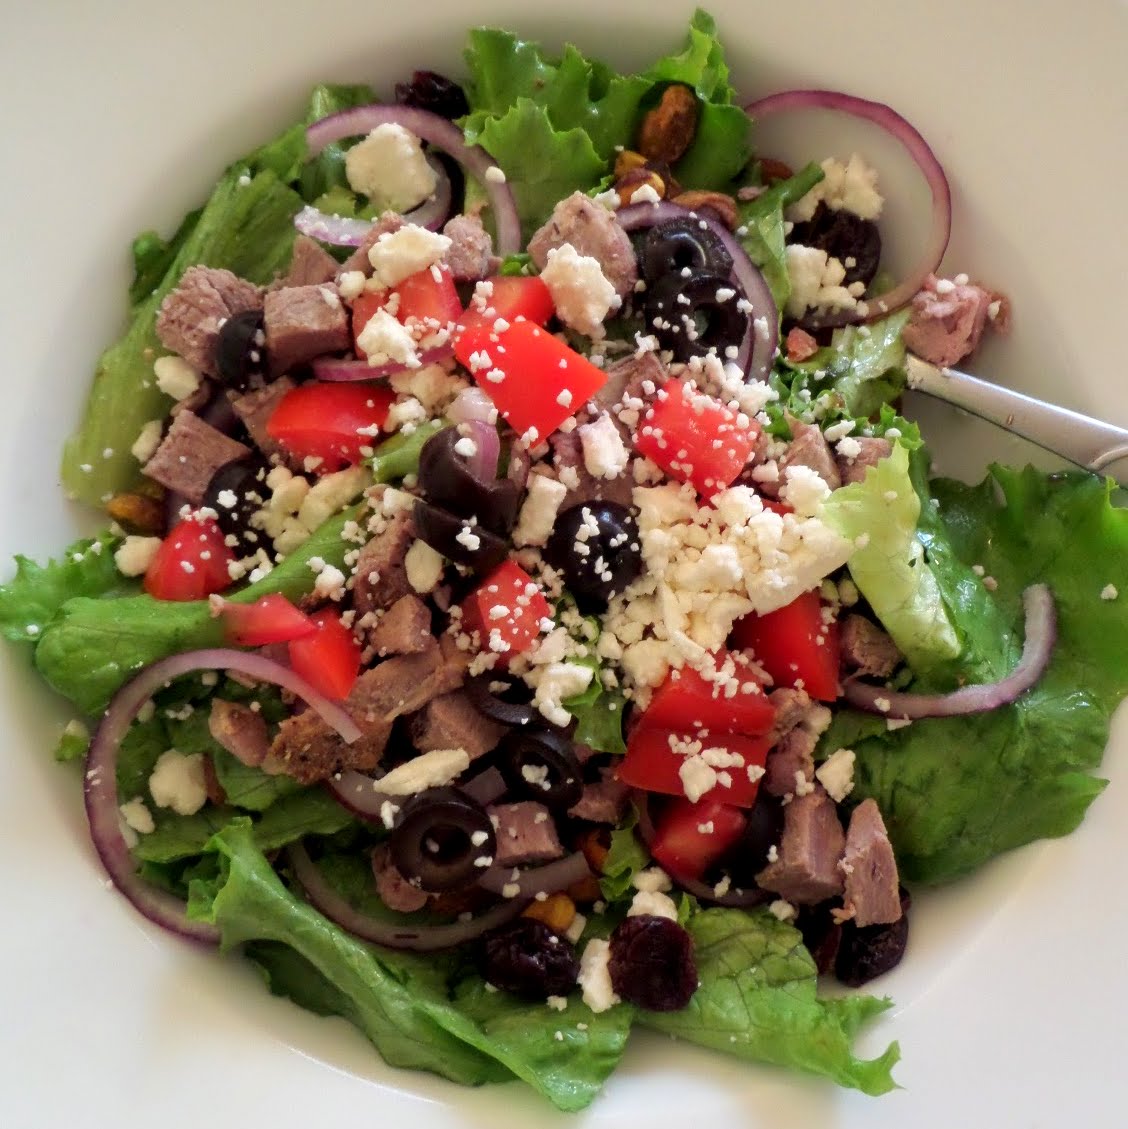 Lamb Salad:  A green salad topped with left over Herb Roasted Leg of Lamb, olives, tomatoes, and feta.